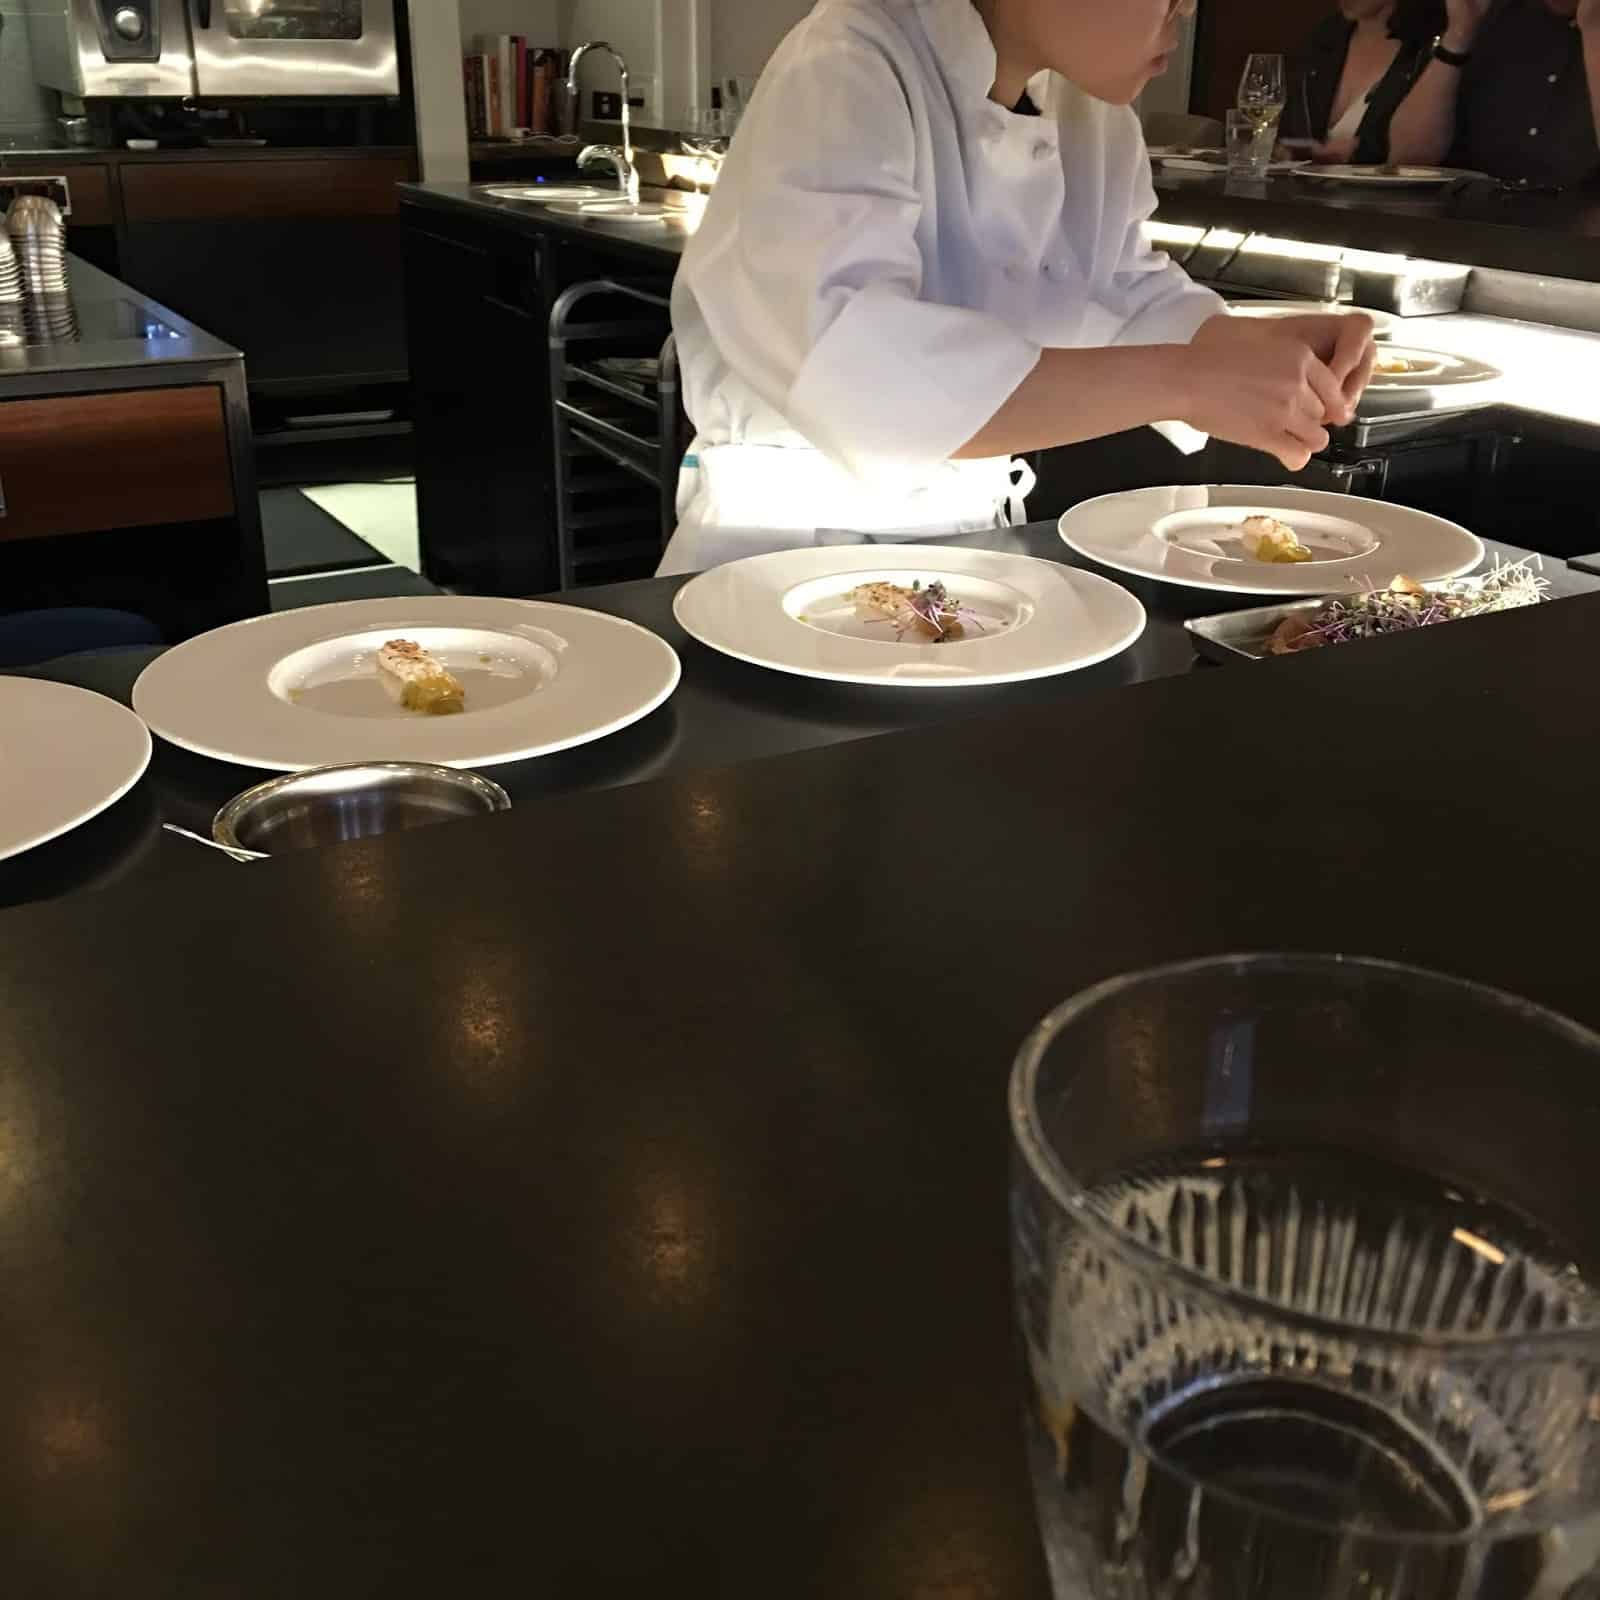 Plating dishes in front of guests at Tasting Counter